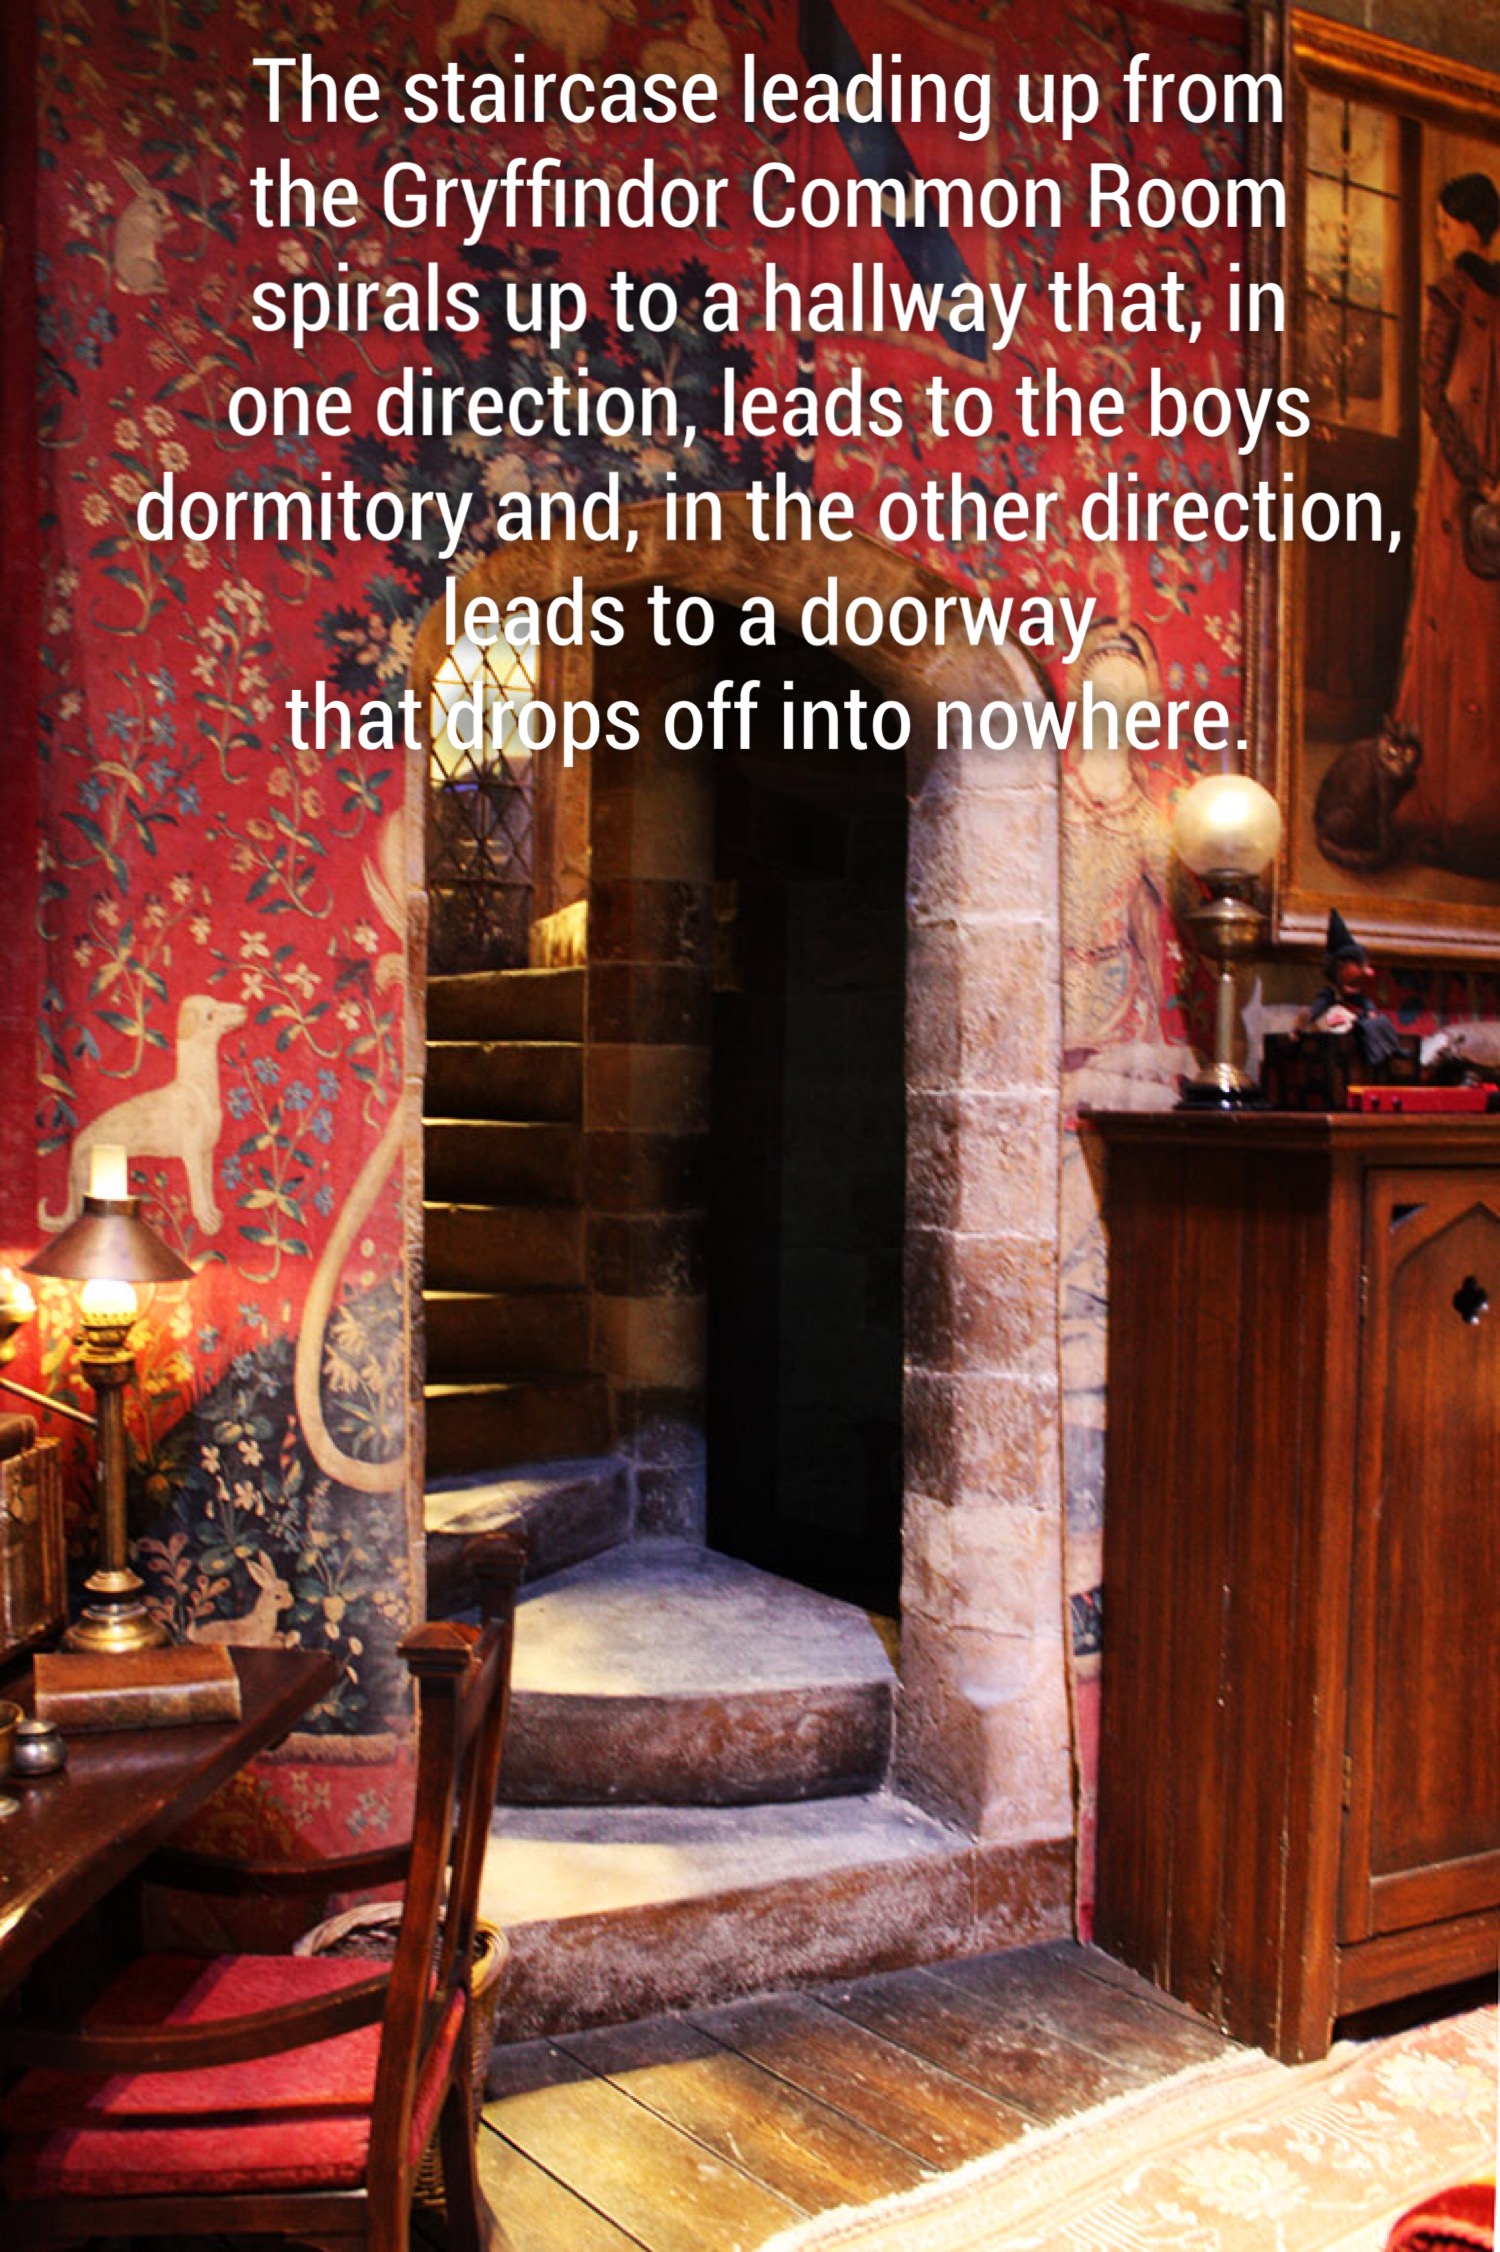 wall - The staircase leading up from the Gryffindor Common Room spirals up to a hallway that, in one direction, leads to the boys. dormitory and, in the other direction, leads to a doorway that drops off into nowhere.